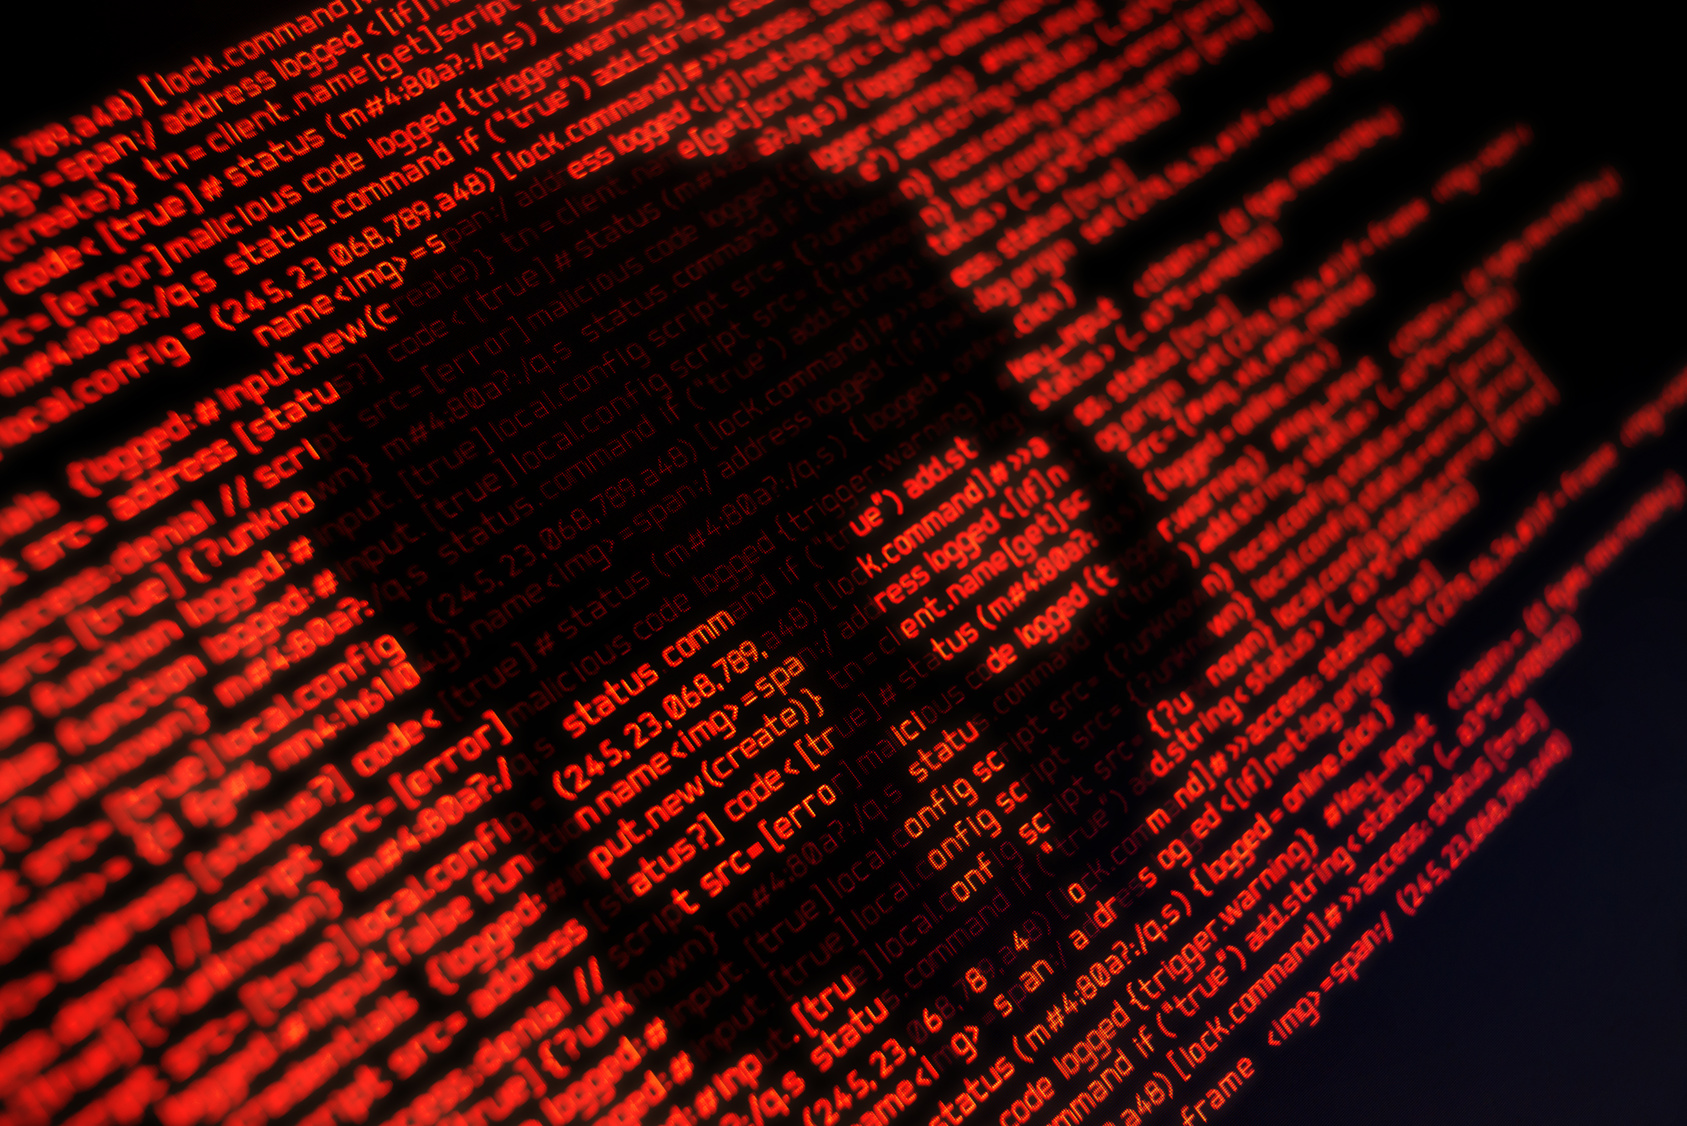 Malware’s primary purpose is to gain control over victim’s Ethereum funds